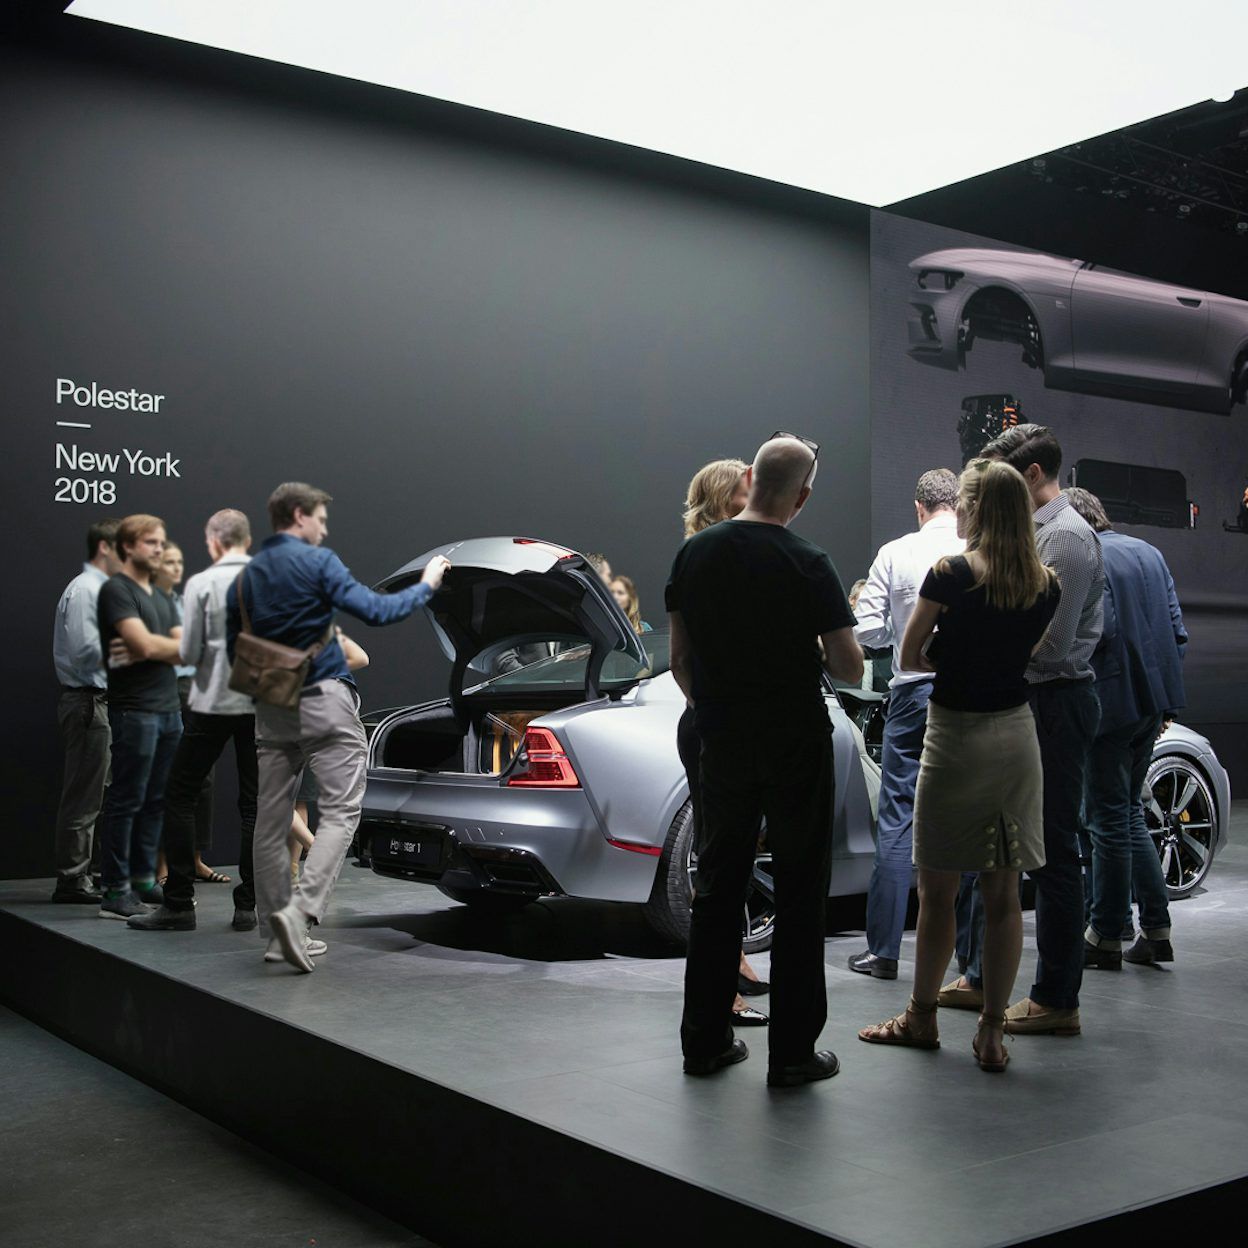 People gathered around a silver Polestar 1 on display